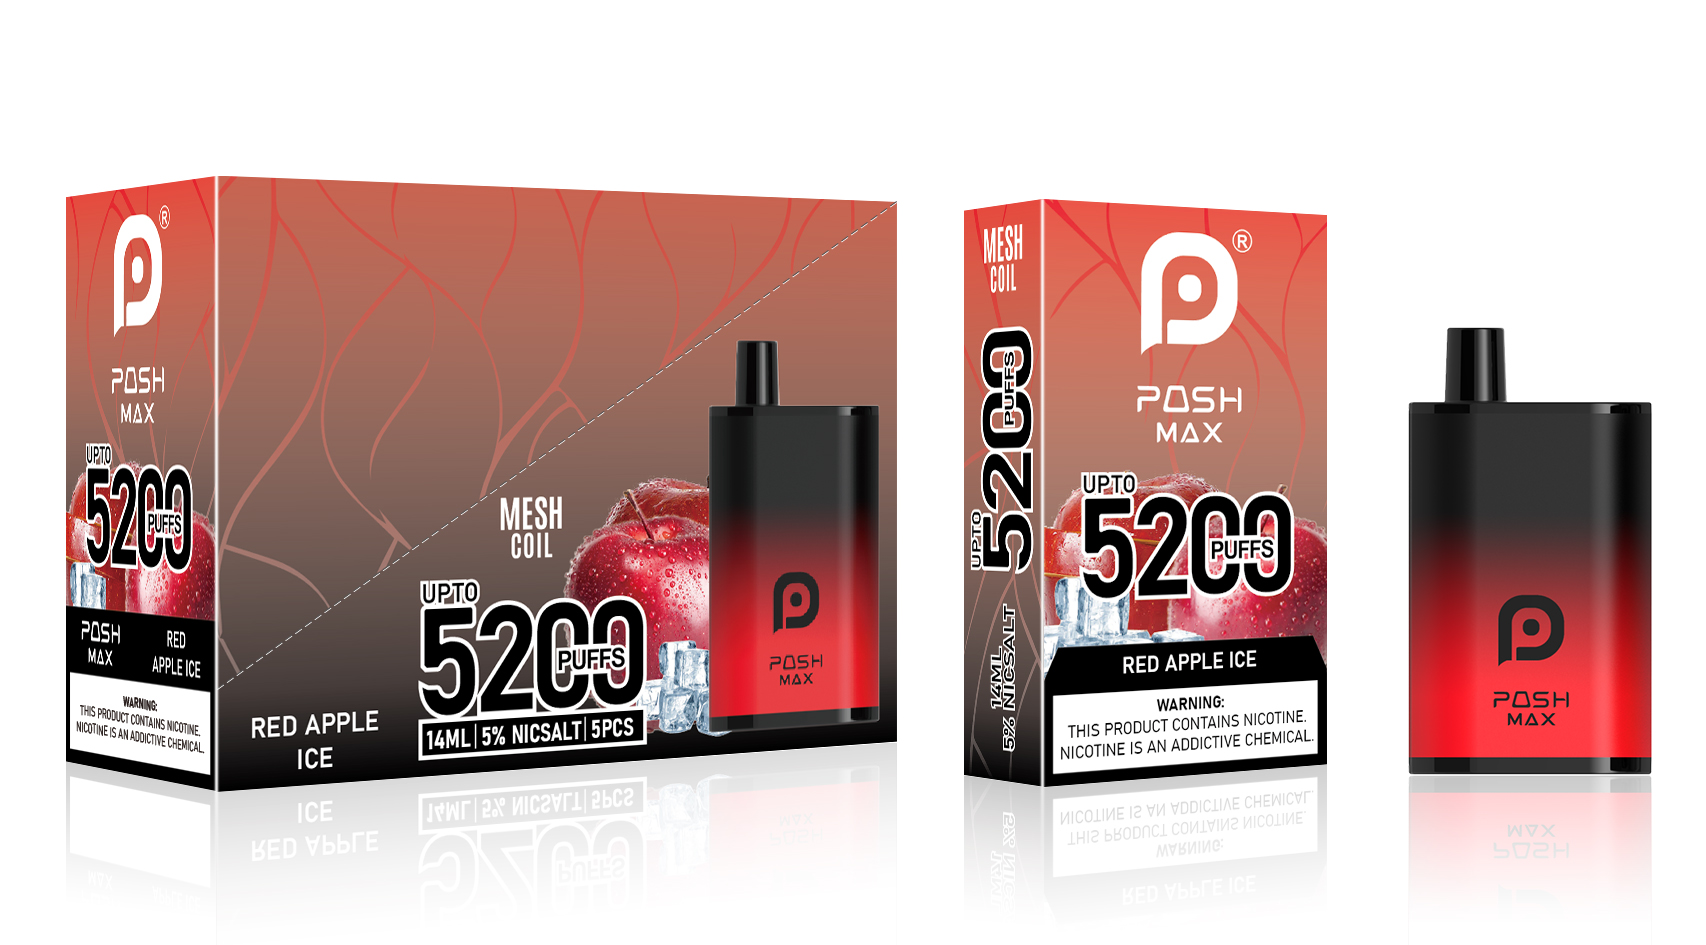 Posh MAX 5200 Red Apple Ice - 5 in 1